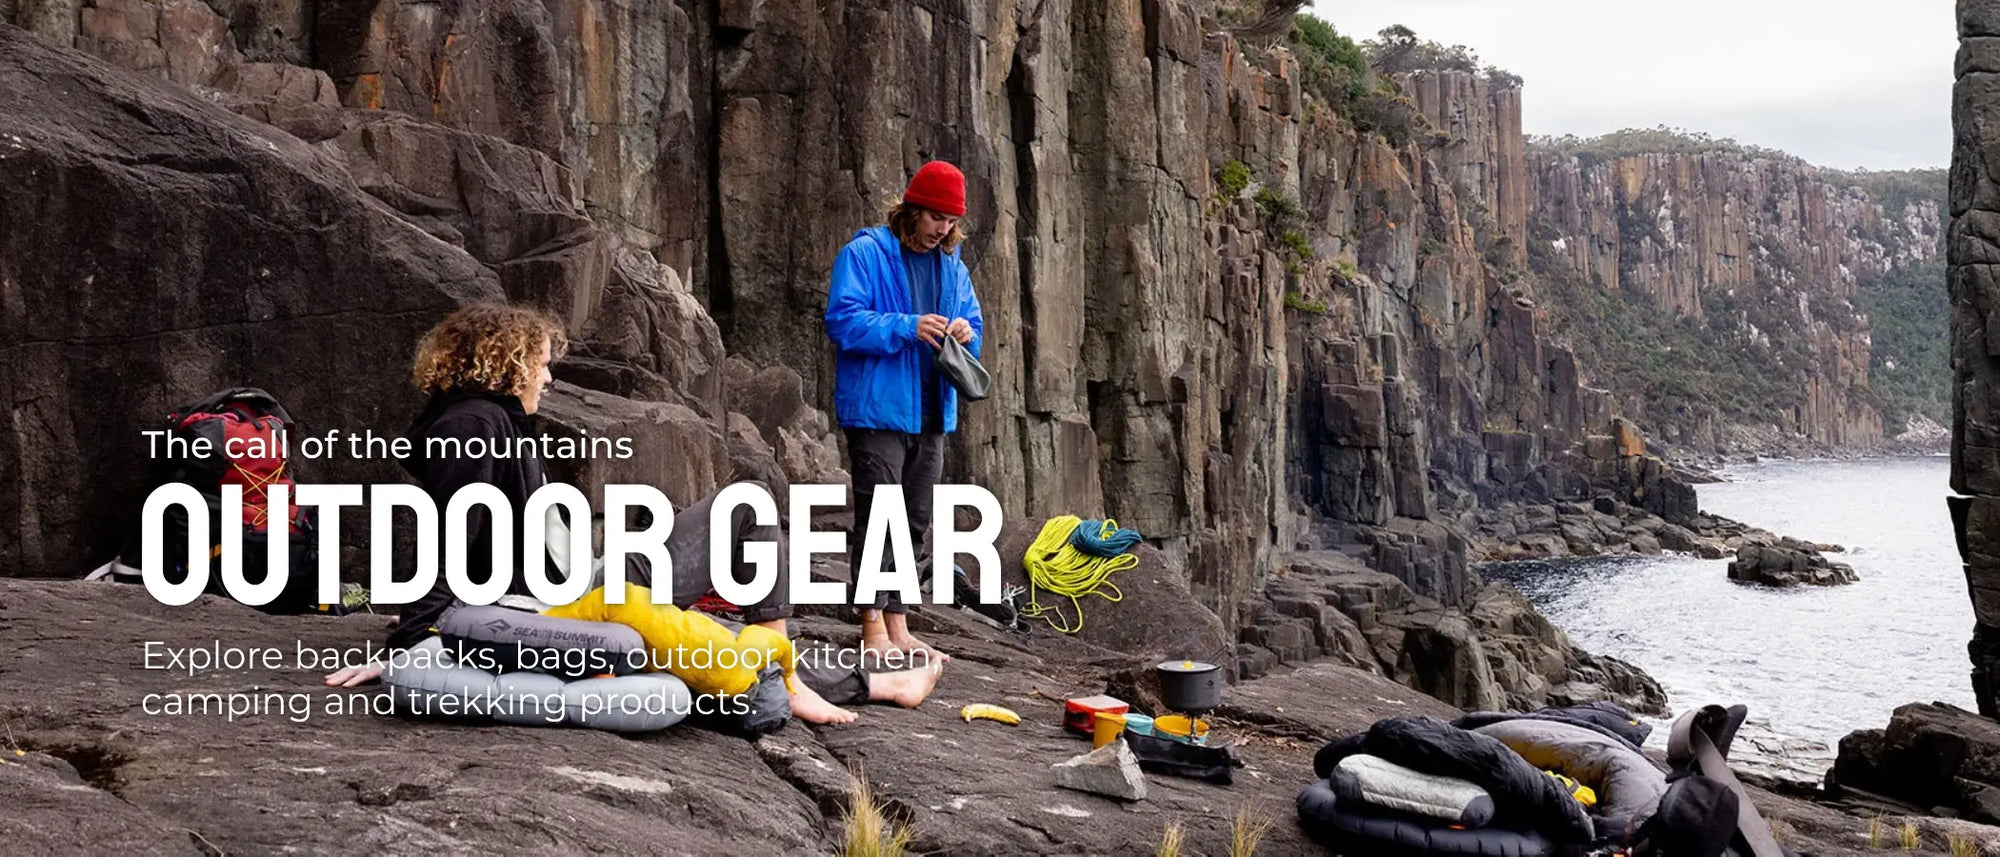 Outdoor Gear - The call of the mountains